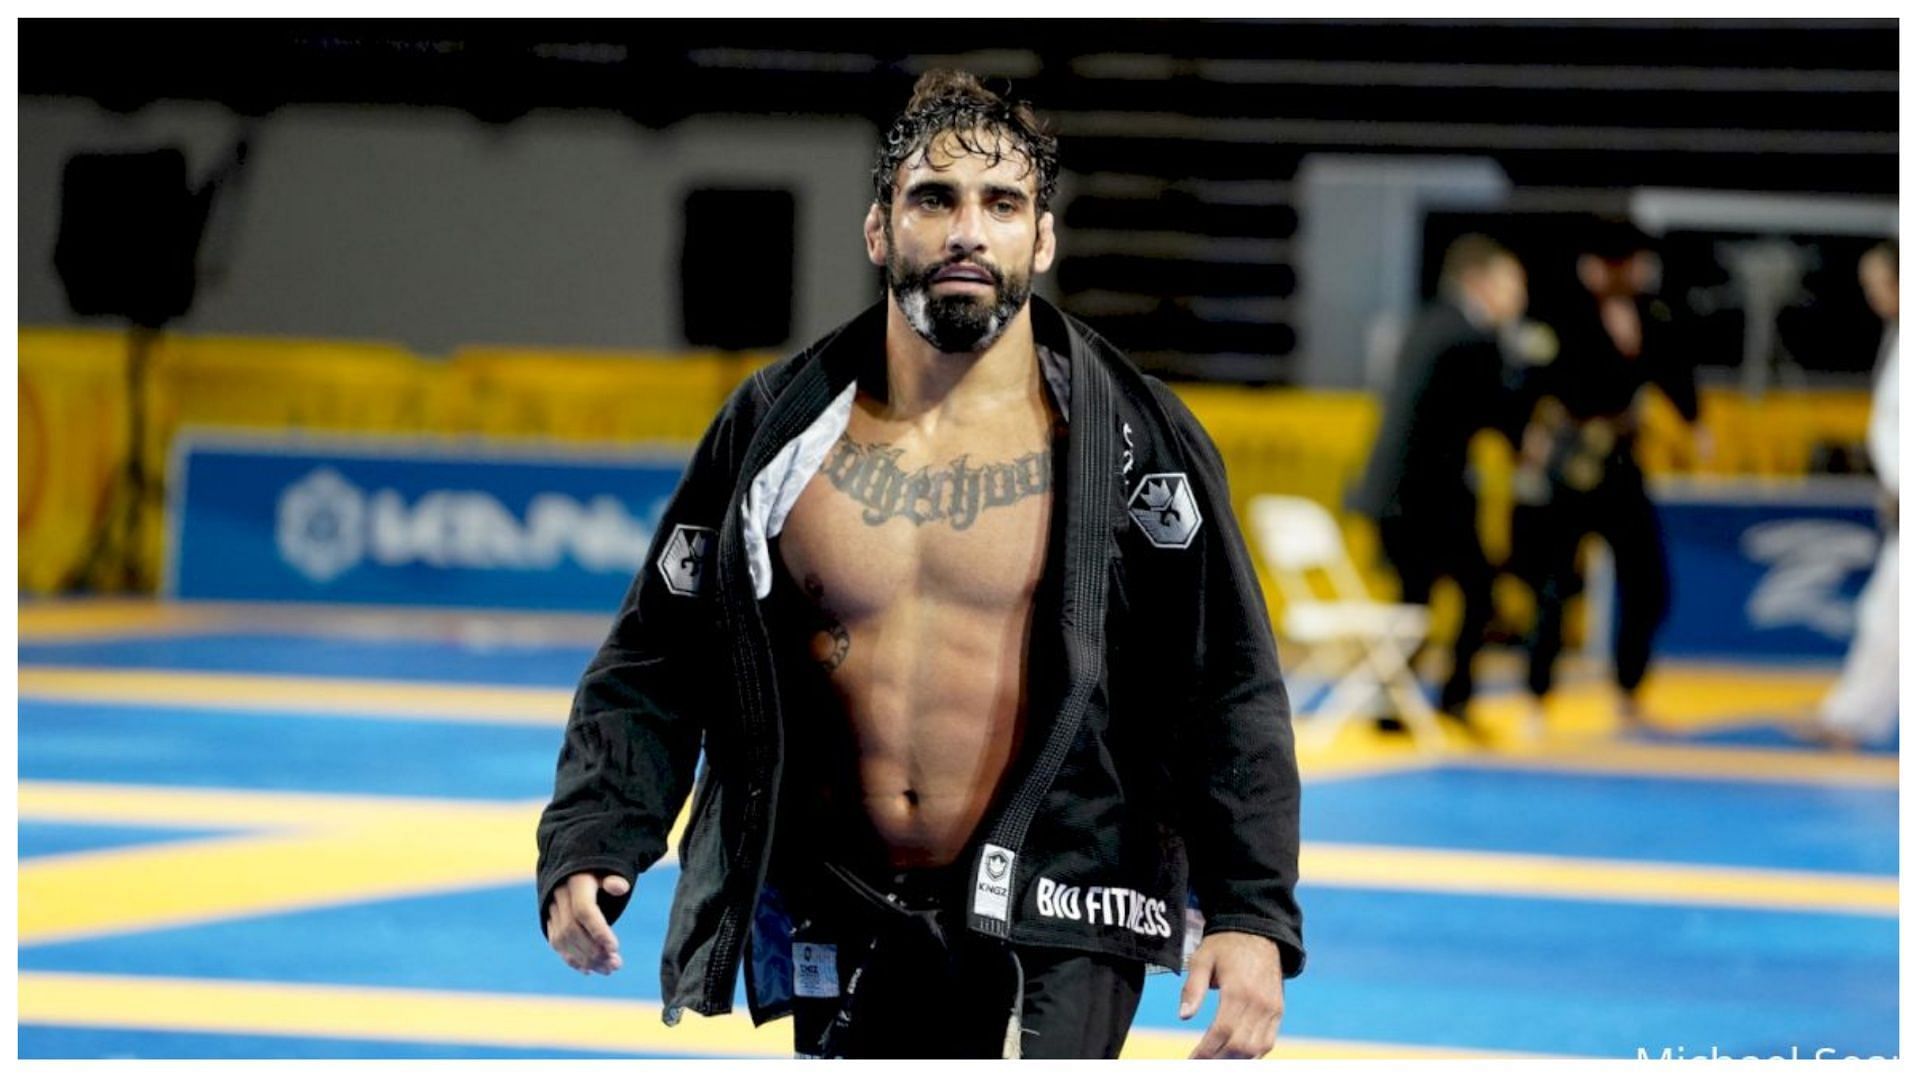 The BJJ star was allegedly gunned down by an off-duty police officer (image via Michael Sears/Flo Grappling)